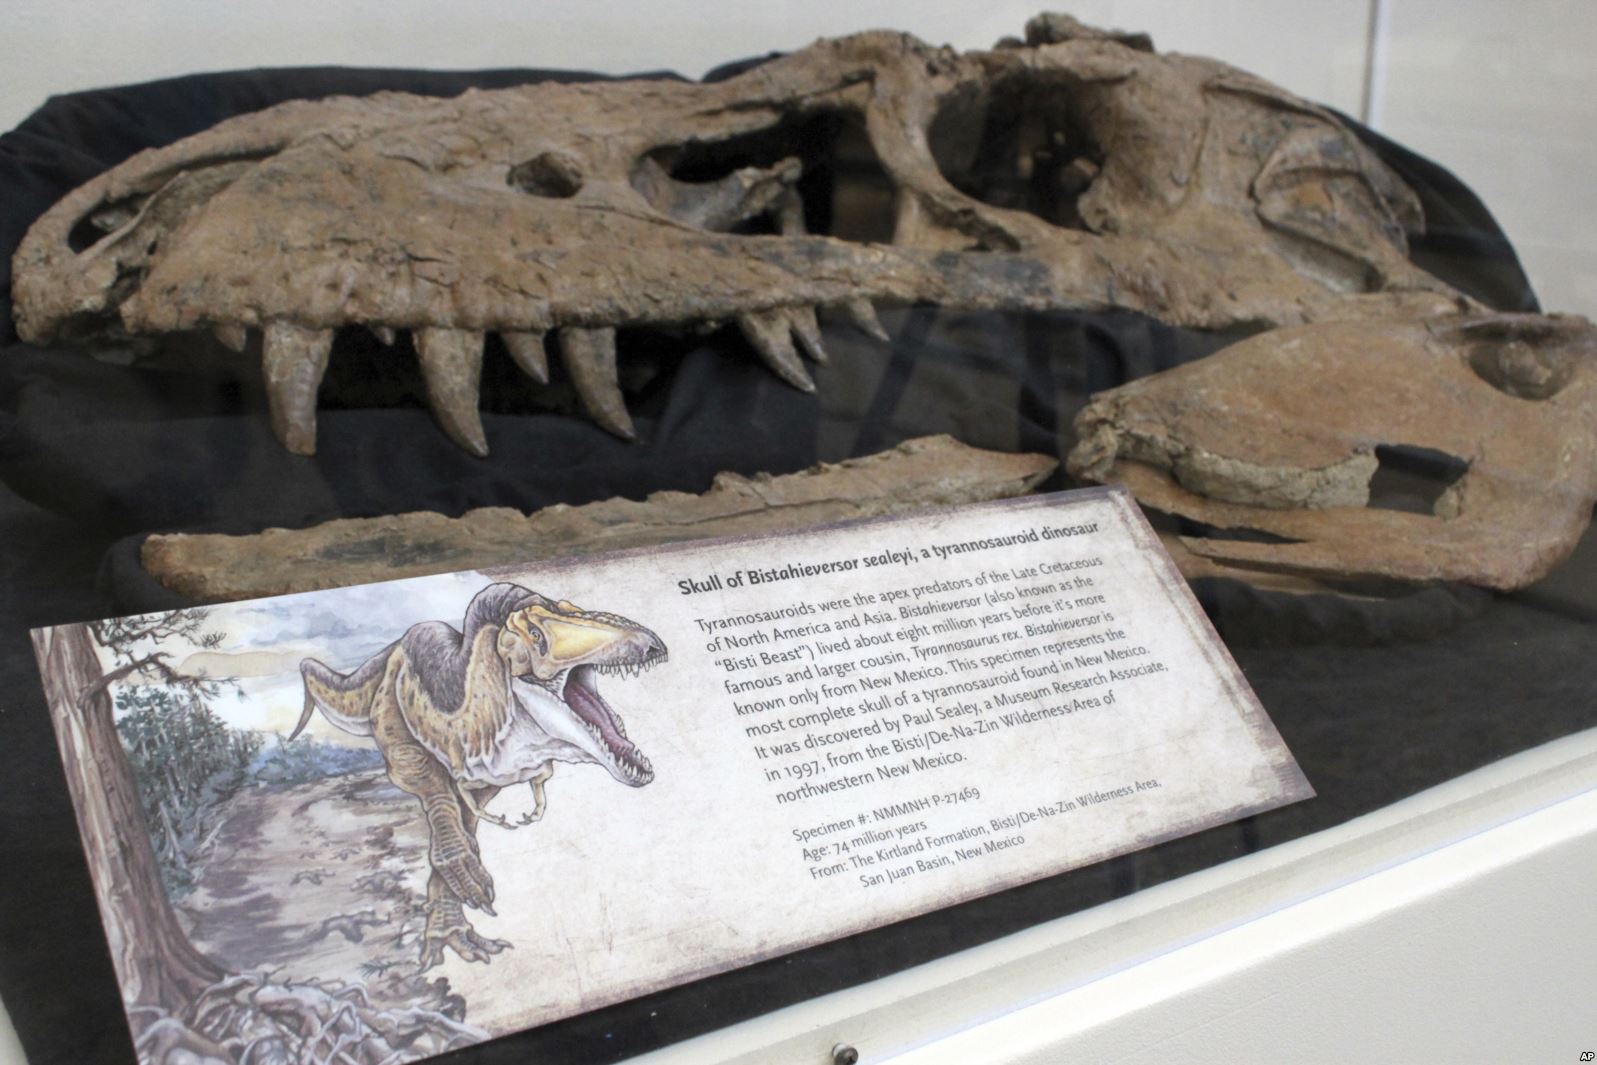 The skull of a tyrannosaur nicknamed the "Bisti Beast" is on display at the New Mexico Museum of Natural History and Science in Albuquerque, N.M., Aug. 15, 2017.